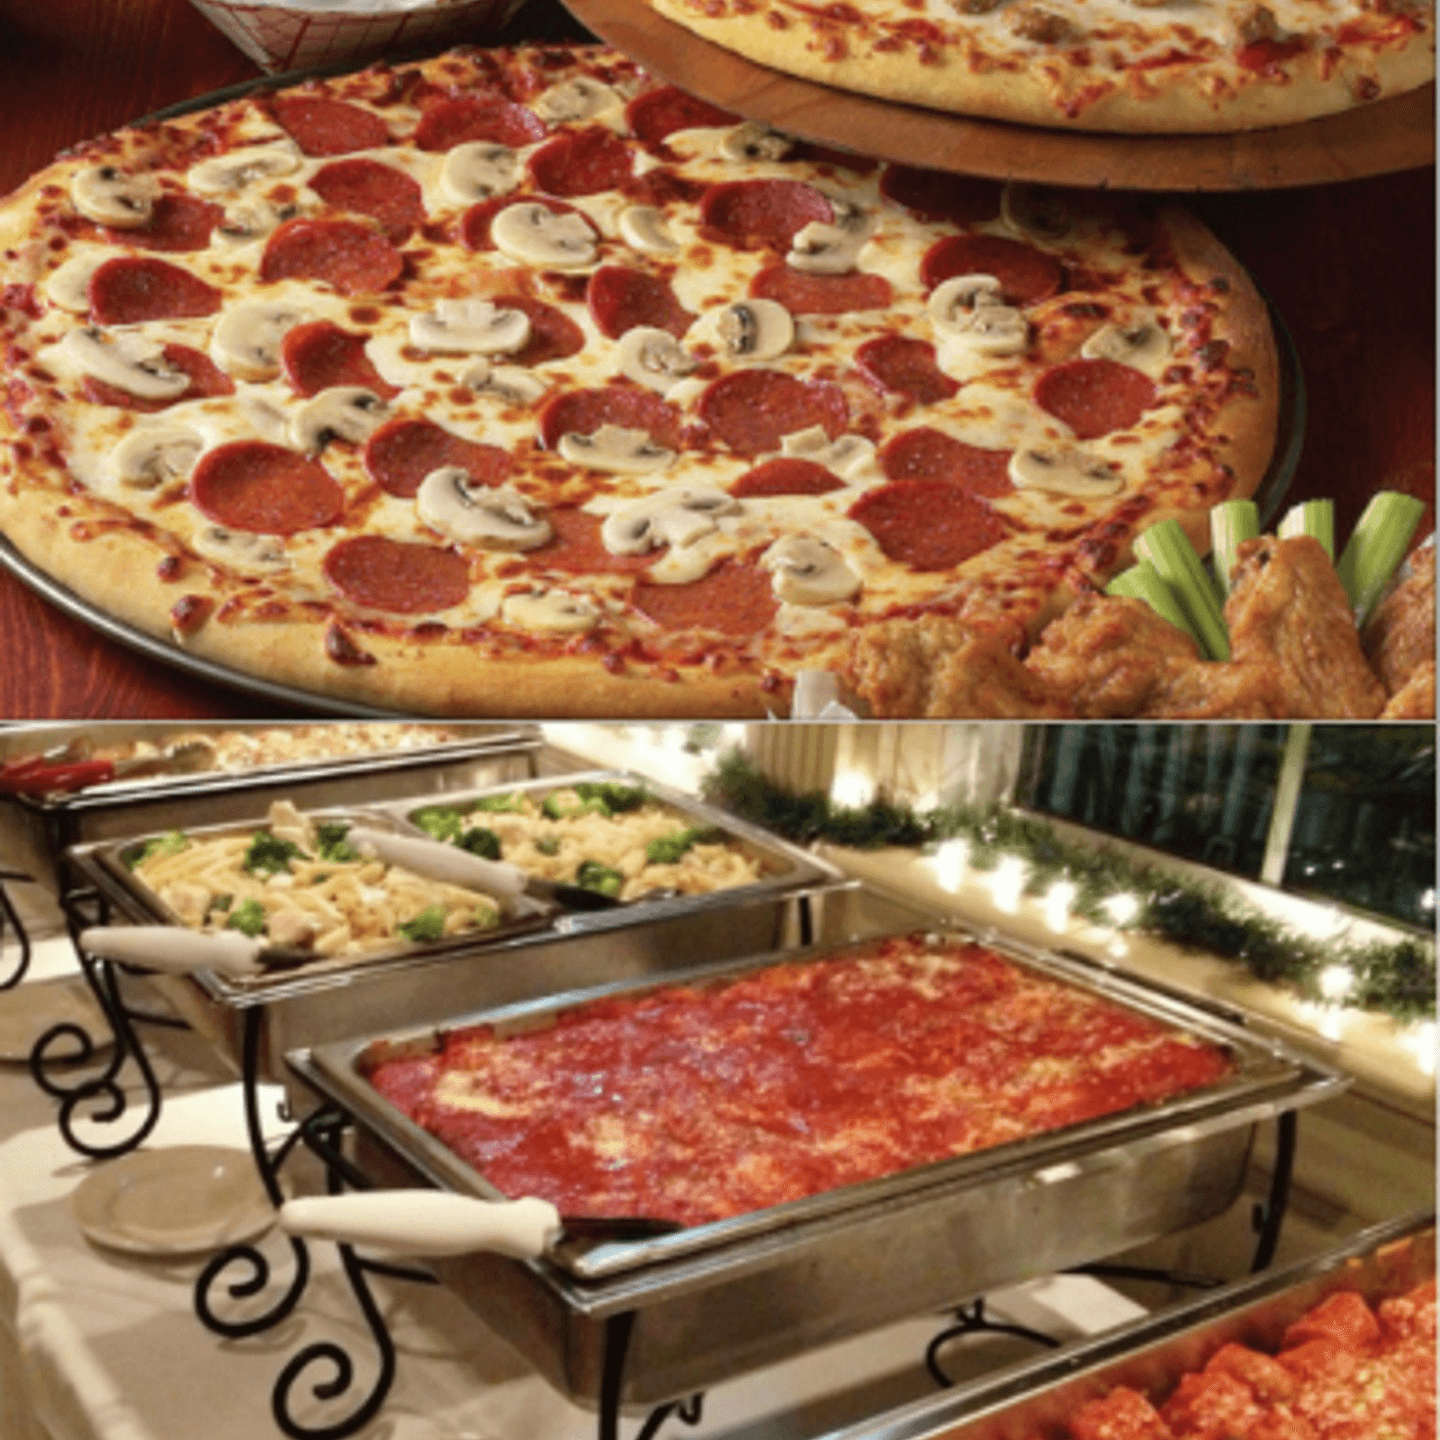 Mario's: Premier Event Catering in NY!